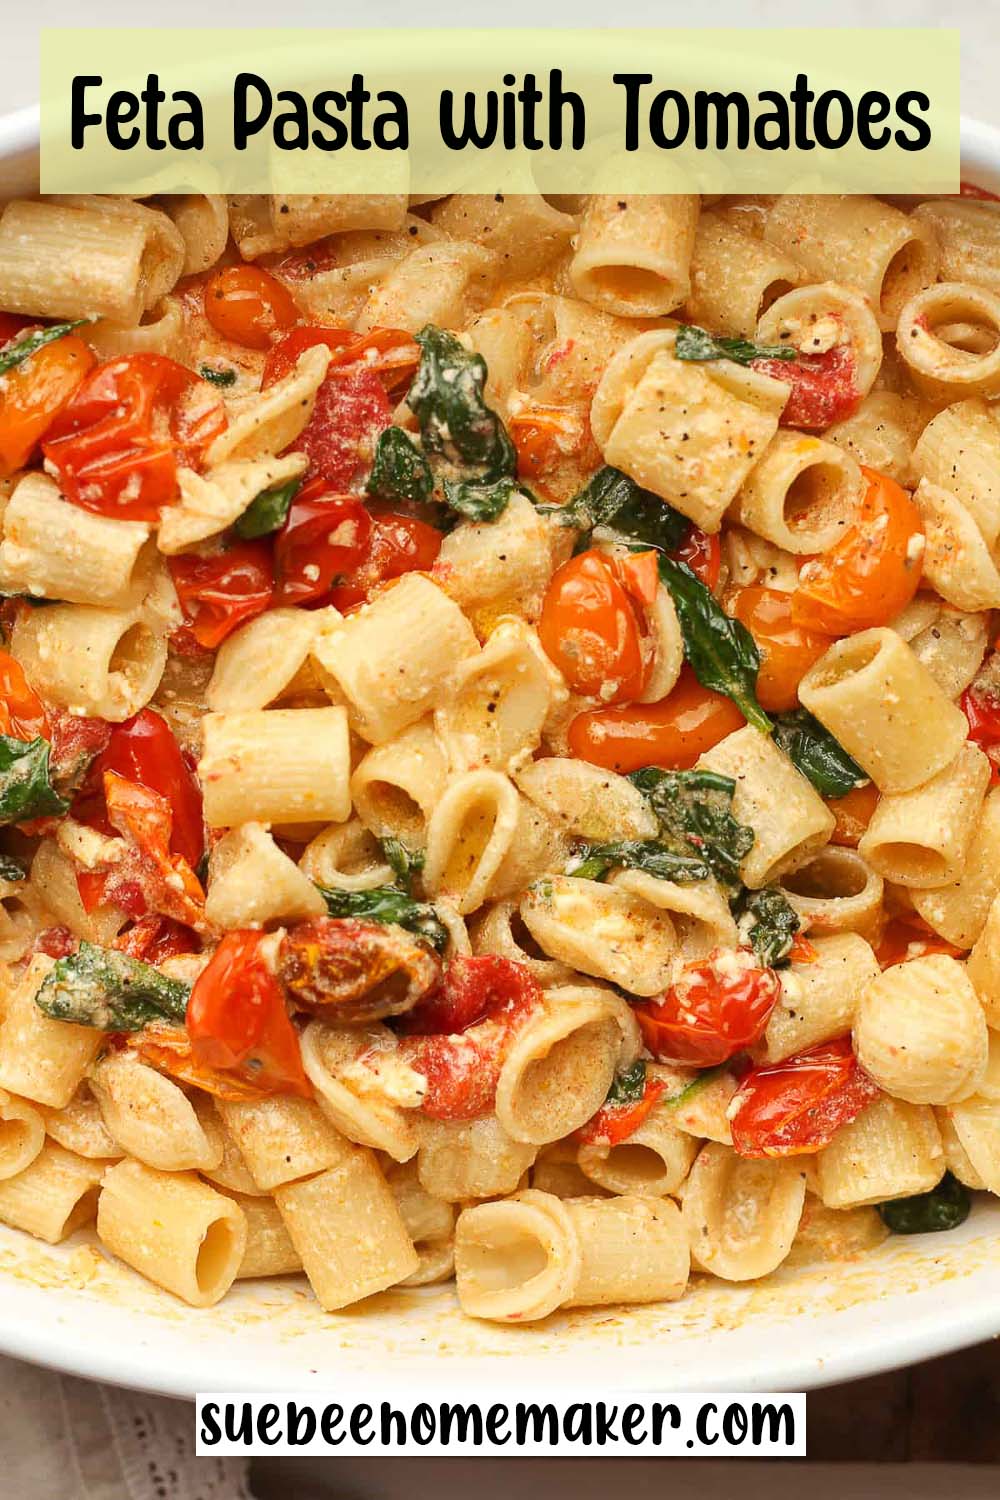 Closeup view of feta pasta with tomatoes.